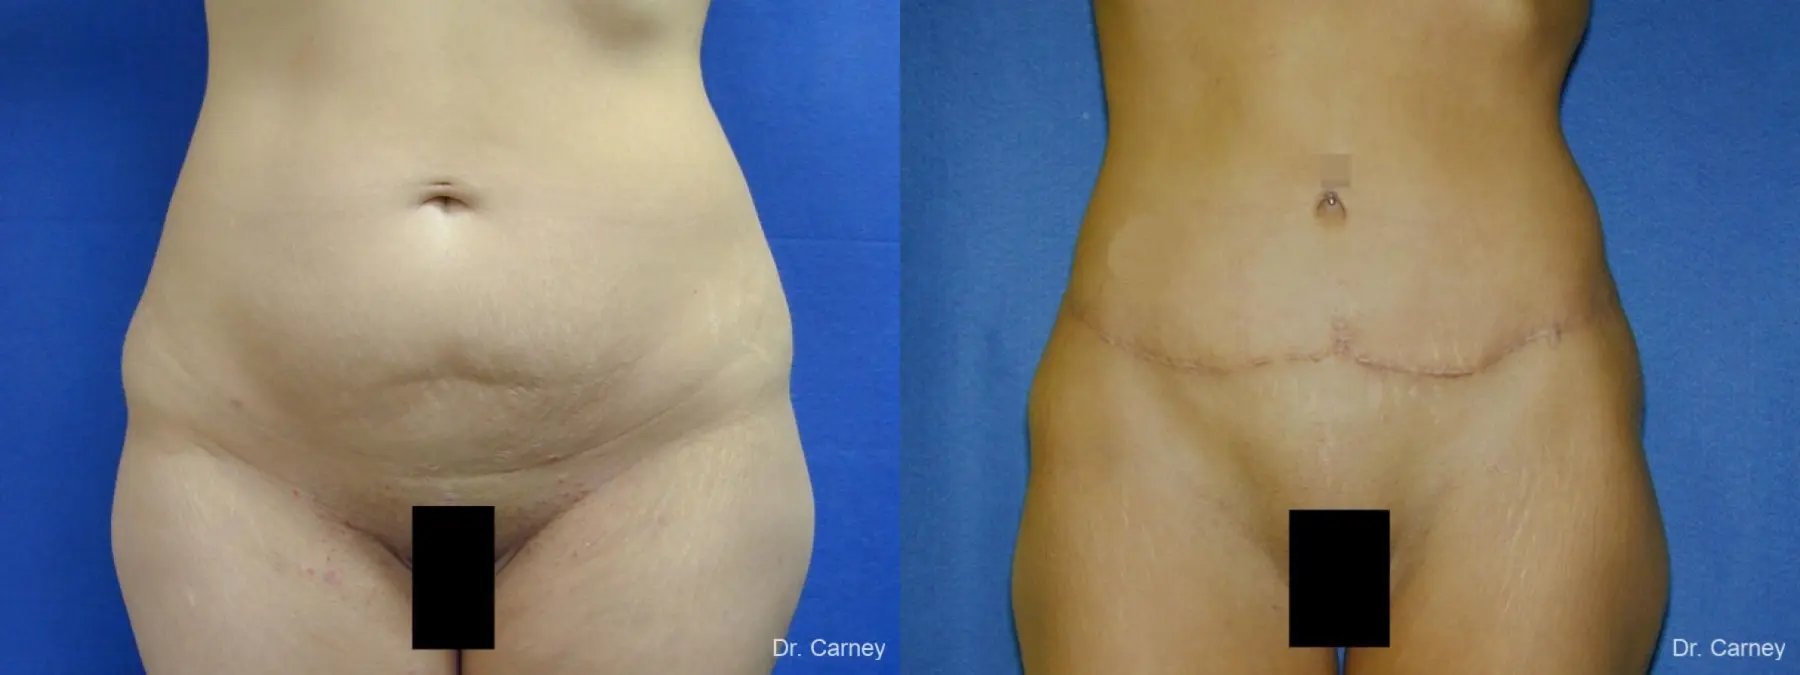 Abdominoplasty: Patient 9 - Before and After 1